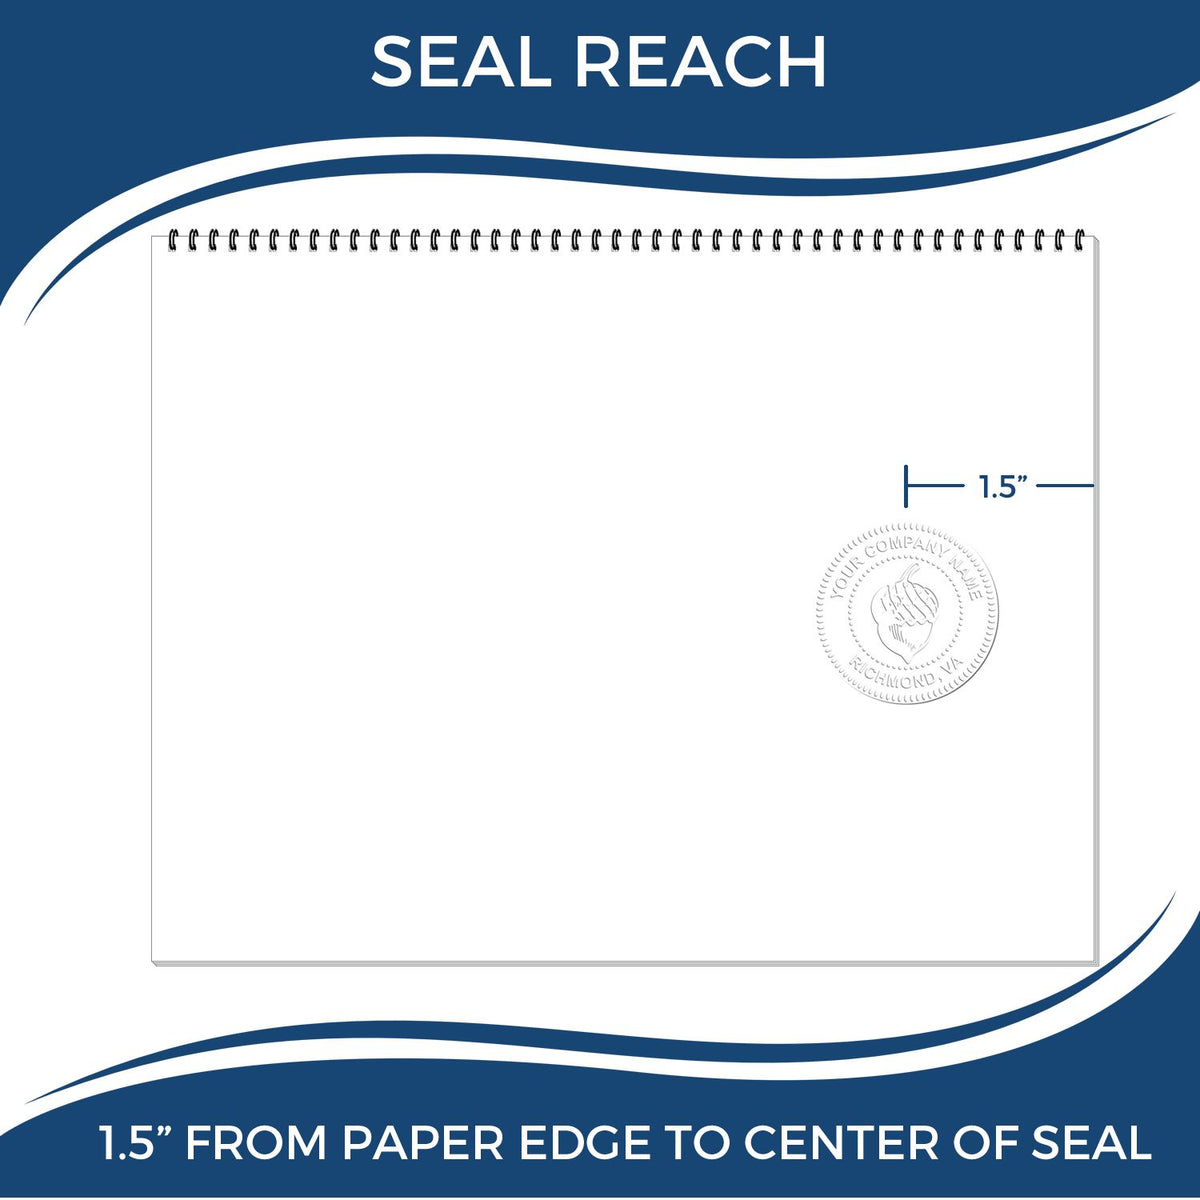 An infographic showing the seal reach which is represented by a ruler and a miniature seal image of the Hybrid Utah Land Surveyor Seal